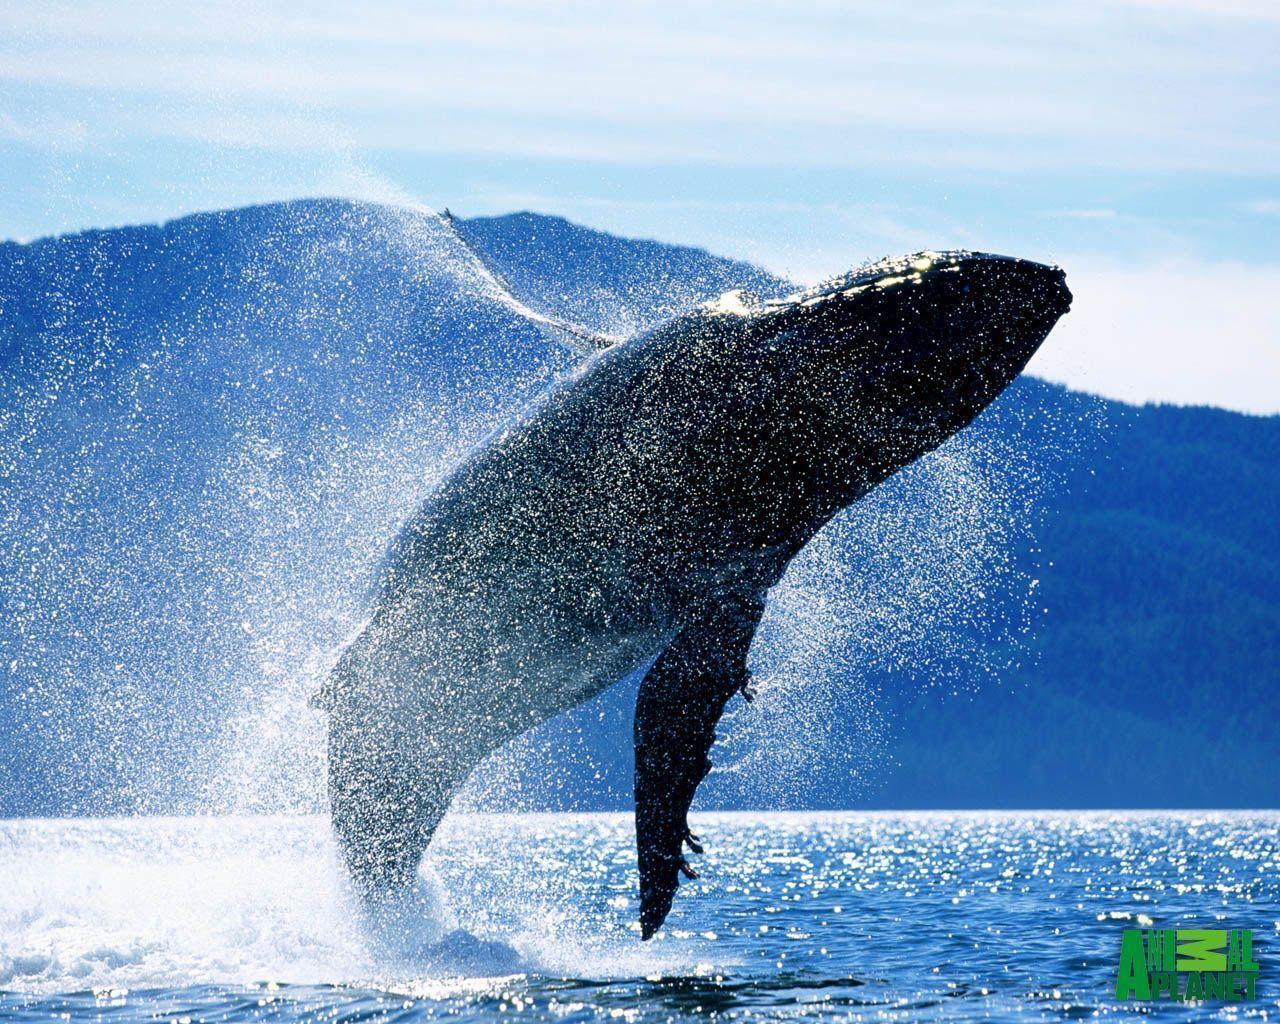 Hump Back Whale Whales Wallpaper